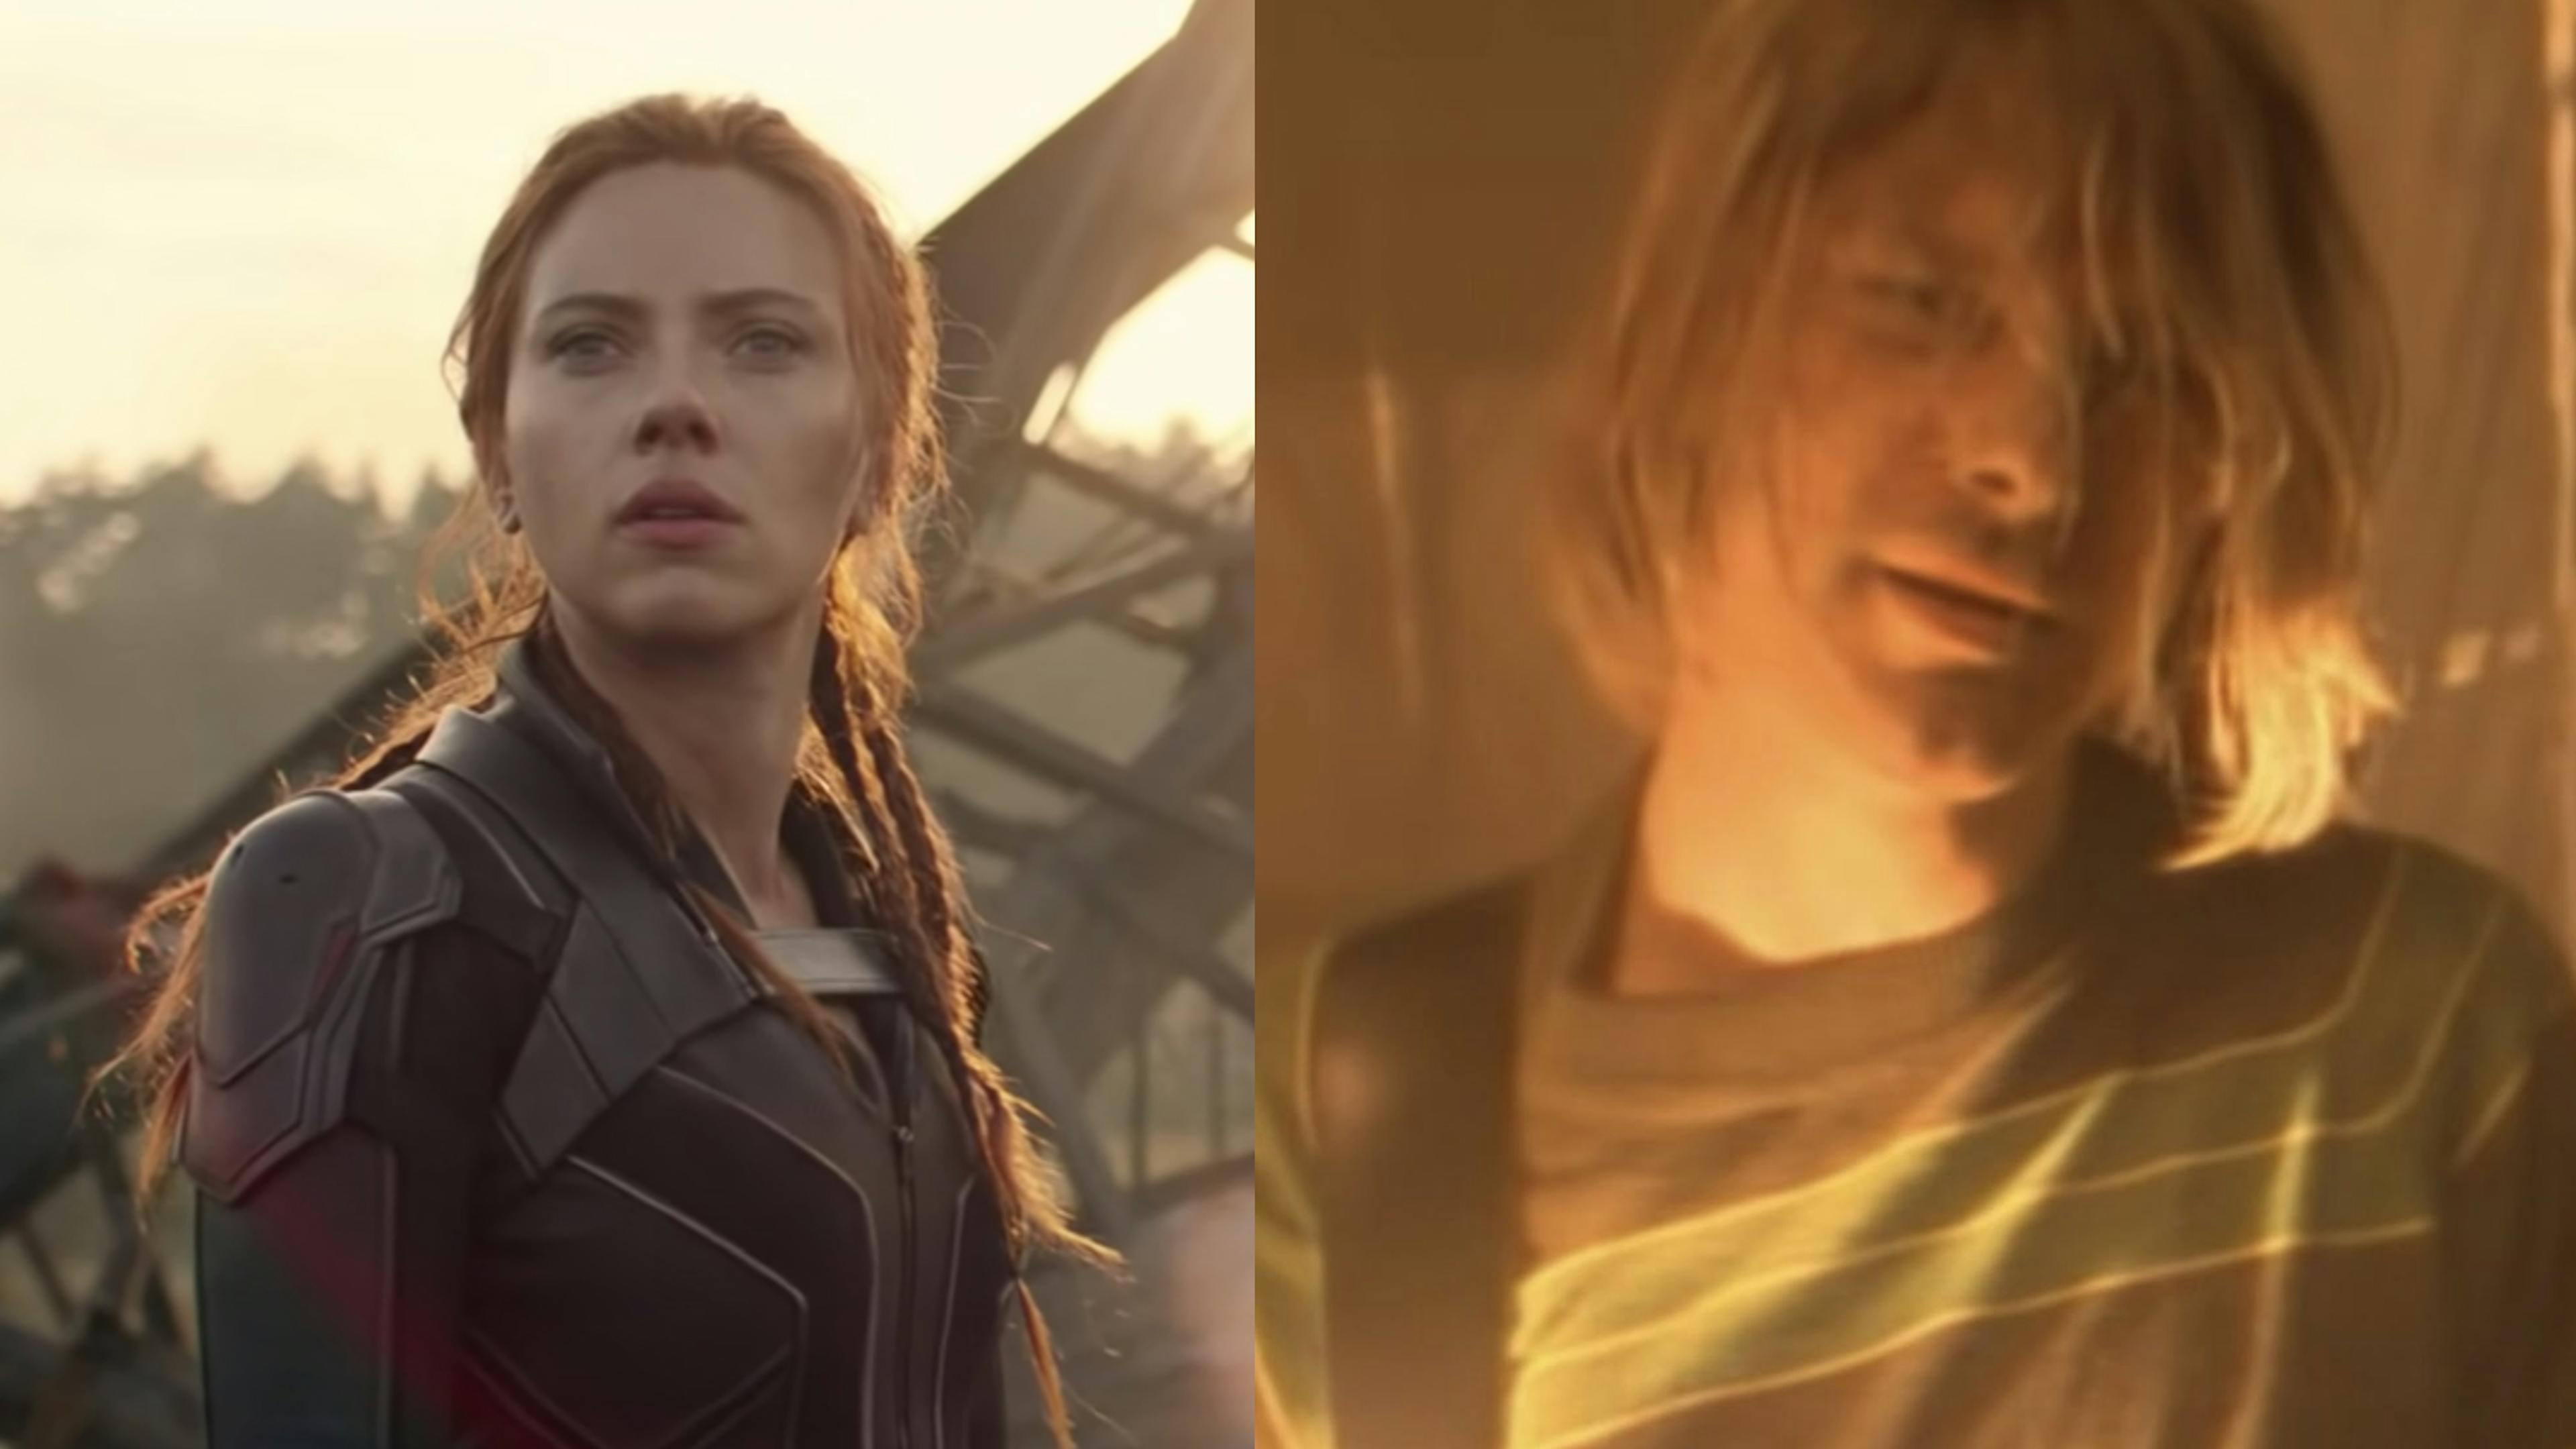 Marvel's Black Widow opens with "dark, dramatic" cover of Nirvana's Smells Like Teen Spirit